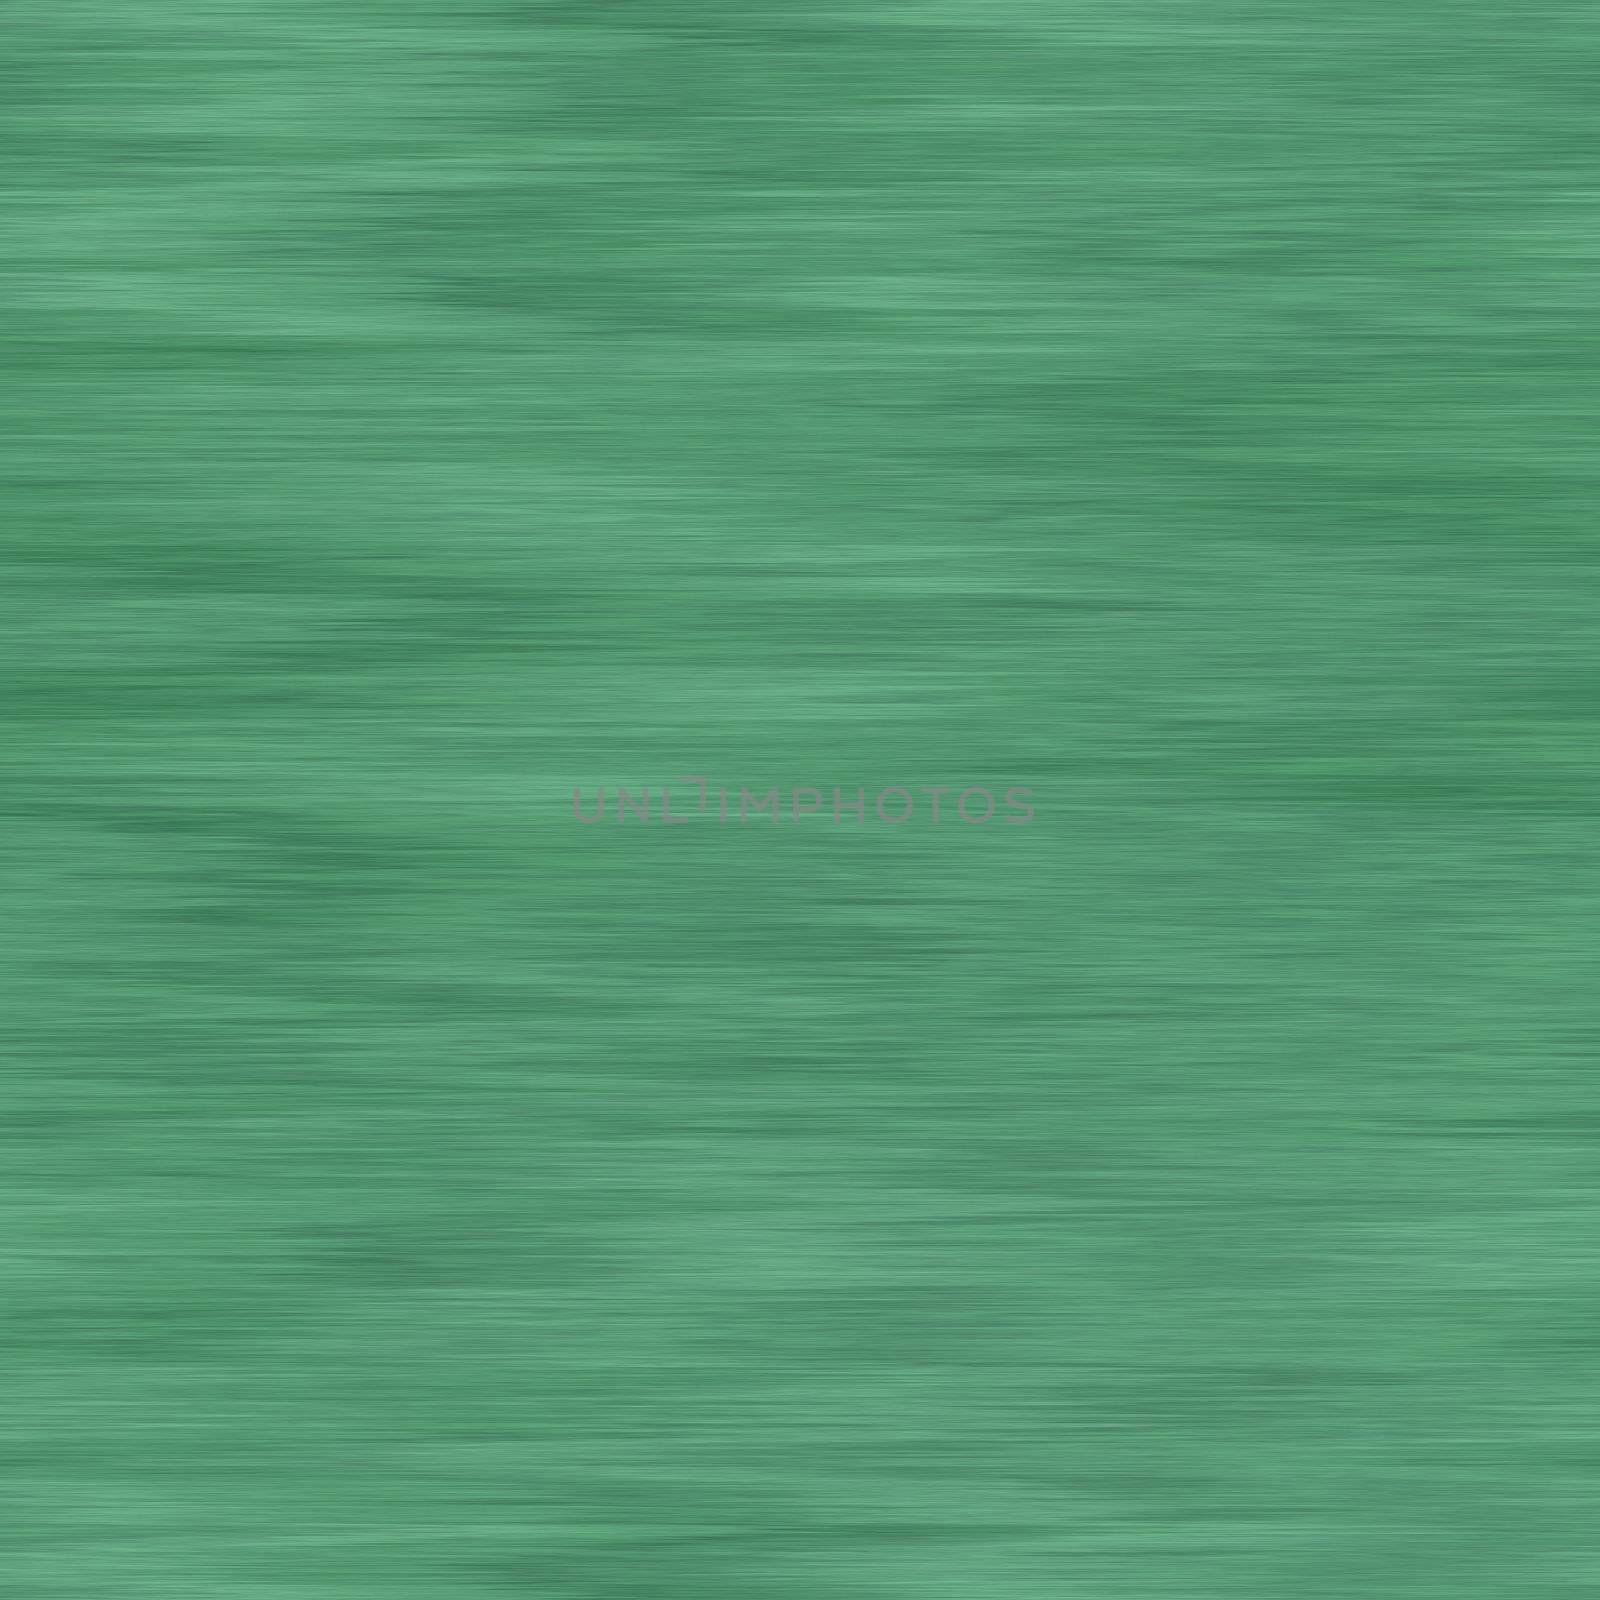 Green wall background seamless